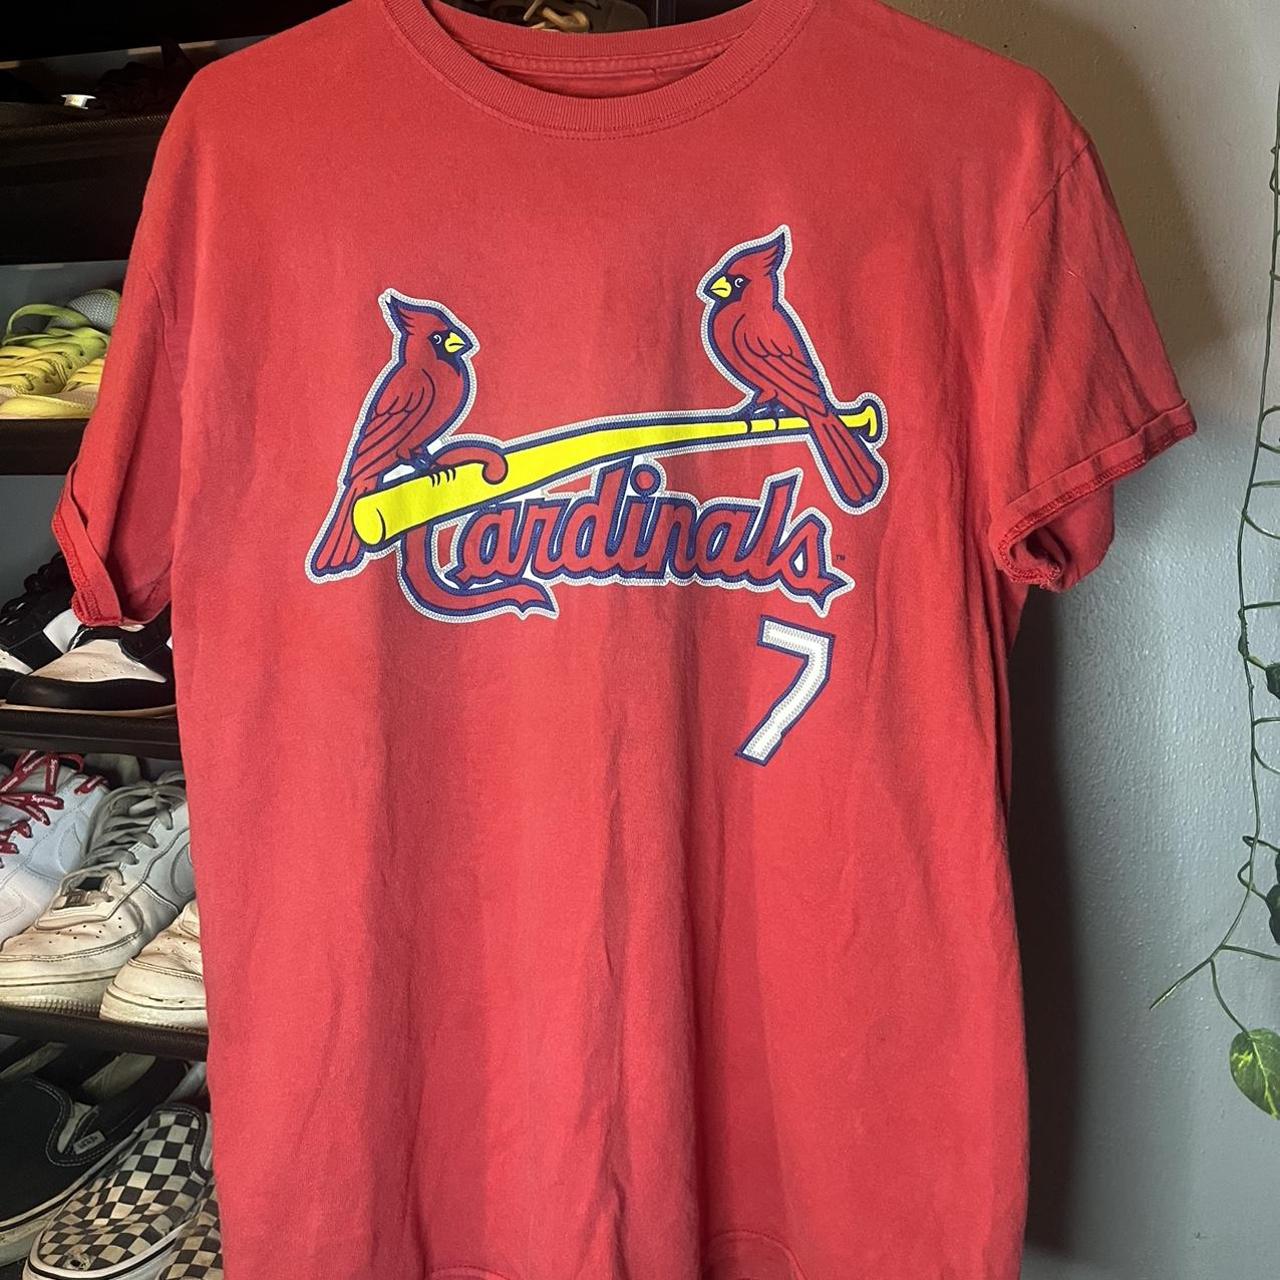 MLB OFFICIAL Cardinals Tee Majestic, Men's Fashion, Tops & Sets